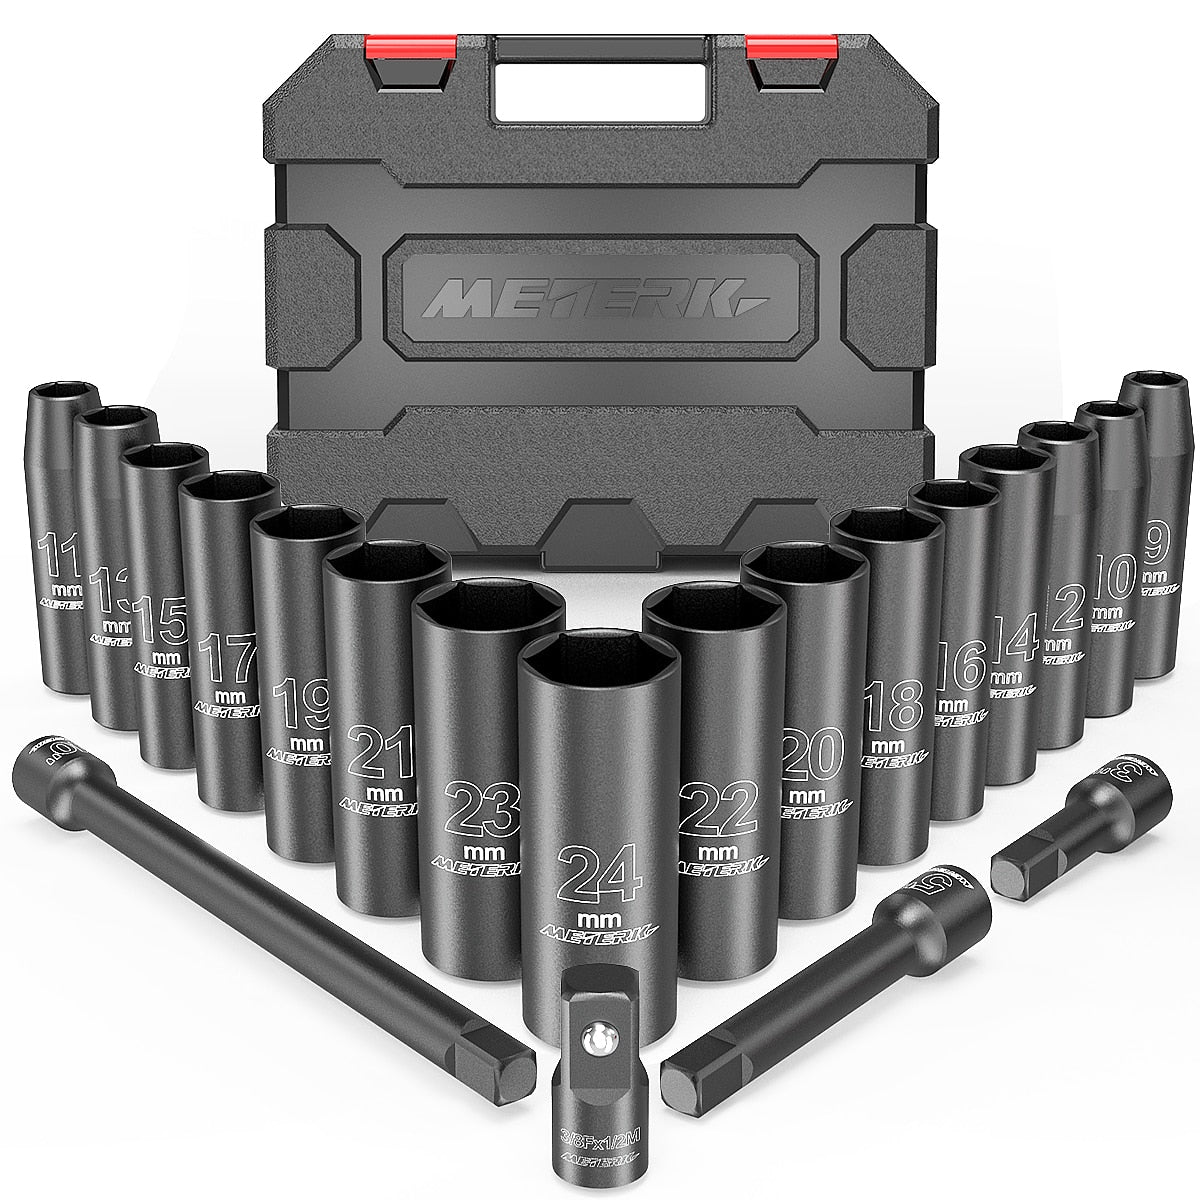 Christmas gift 20Pcs 1/2" Drive Deep Impact Socket Set Drive Metric Wrench Socket Deep Impact Socket Pneumatic Wrench Head Tire Removal Tools